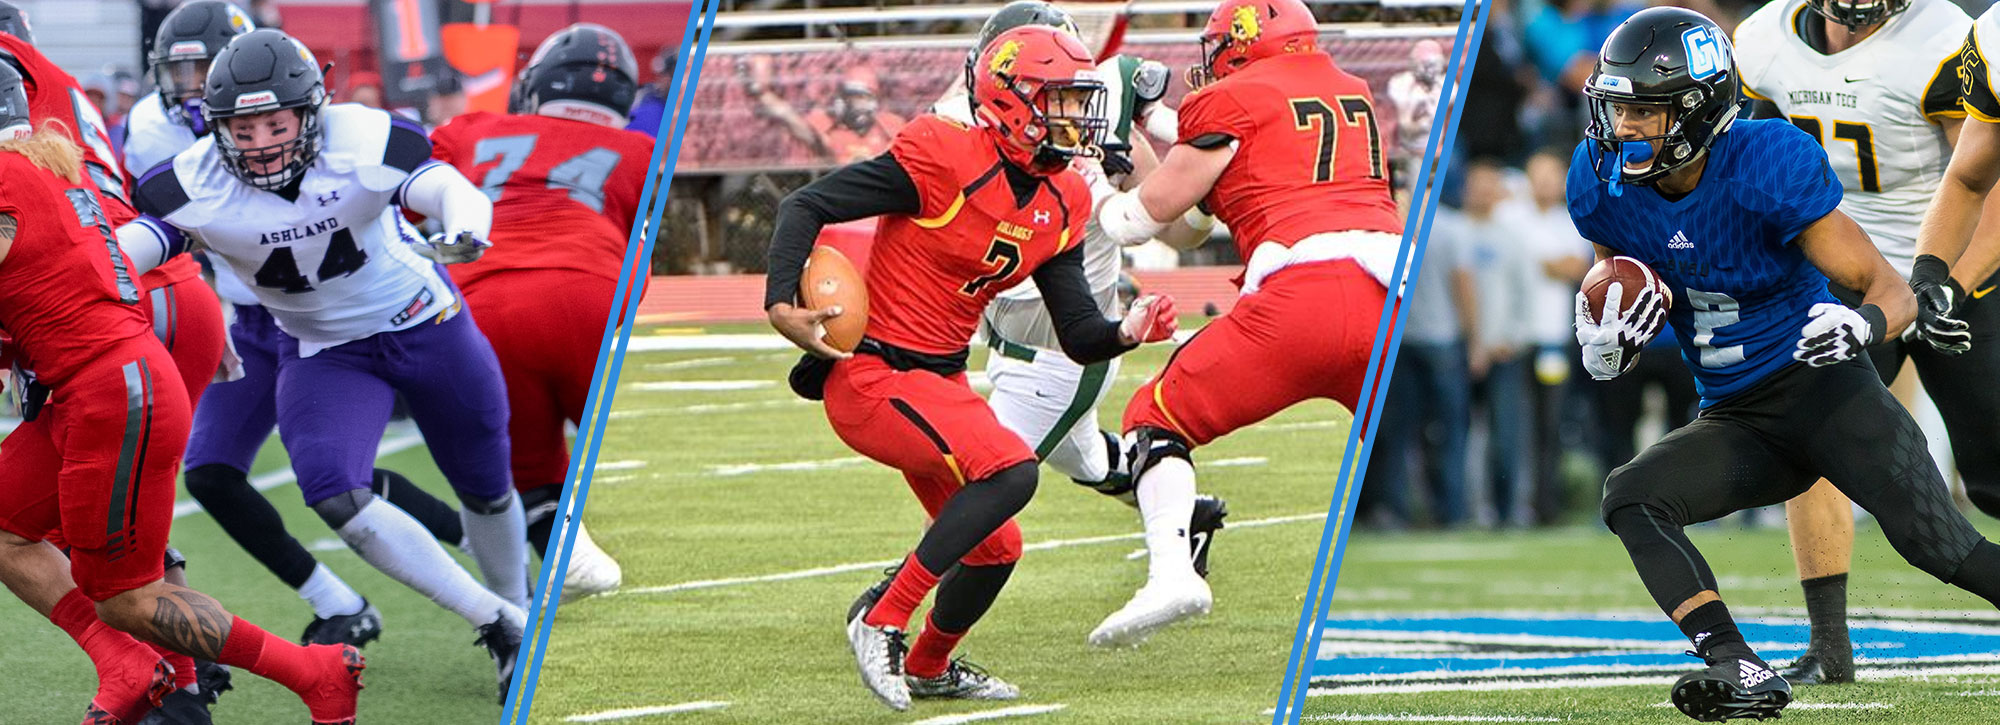 Ferris State's Campbell, Ashland's Reichelderfer & Grand Valley State's Dodson Earn GLIAC Football Player of the Week Distinction